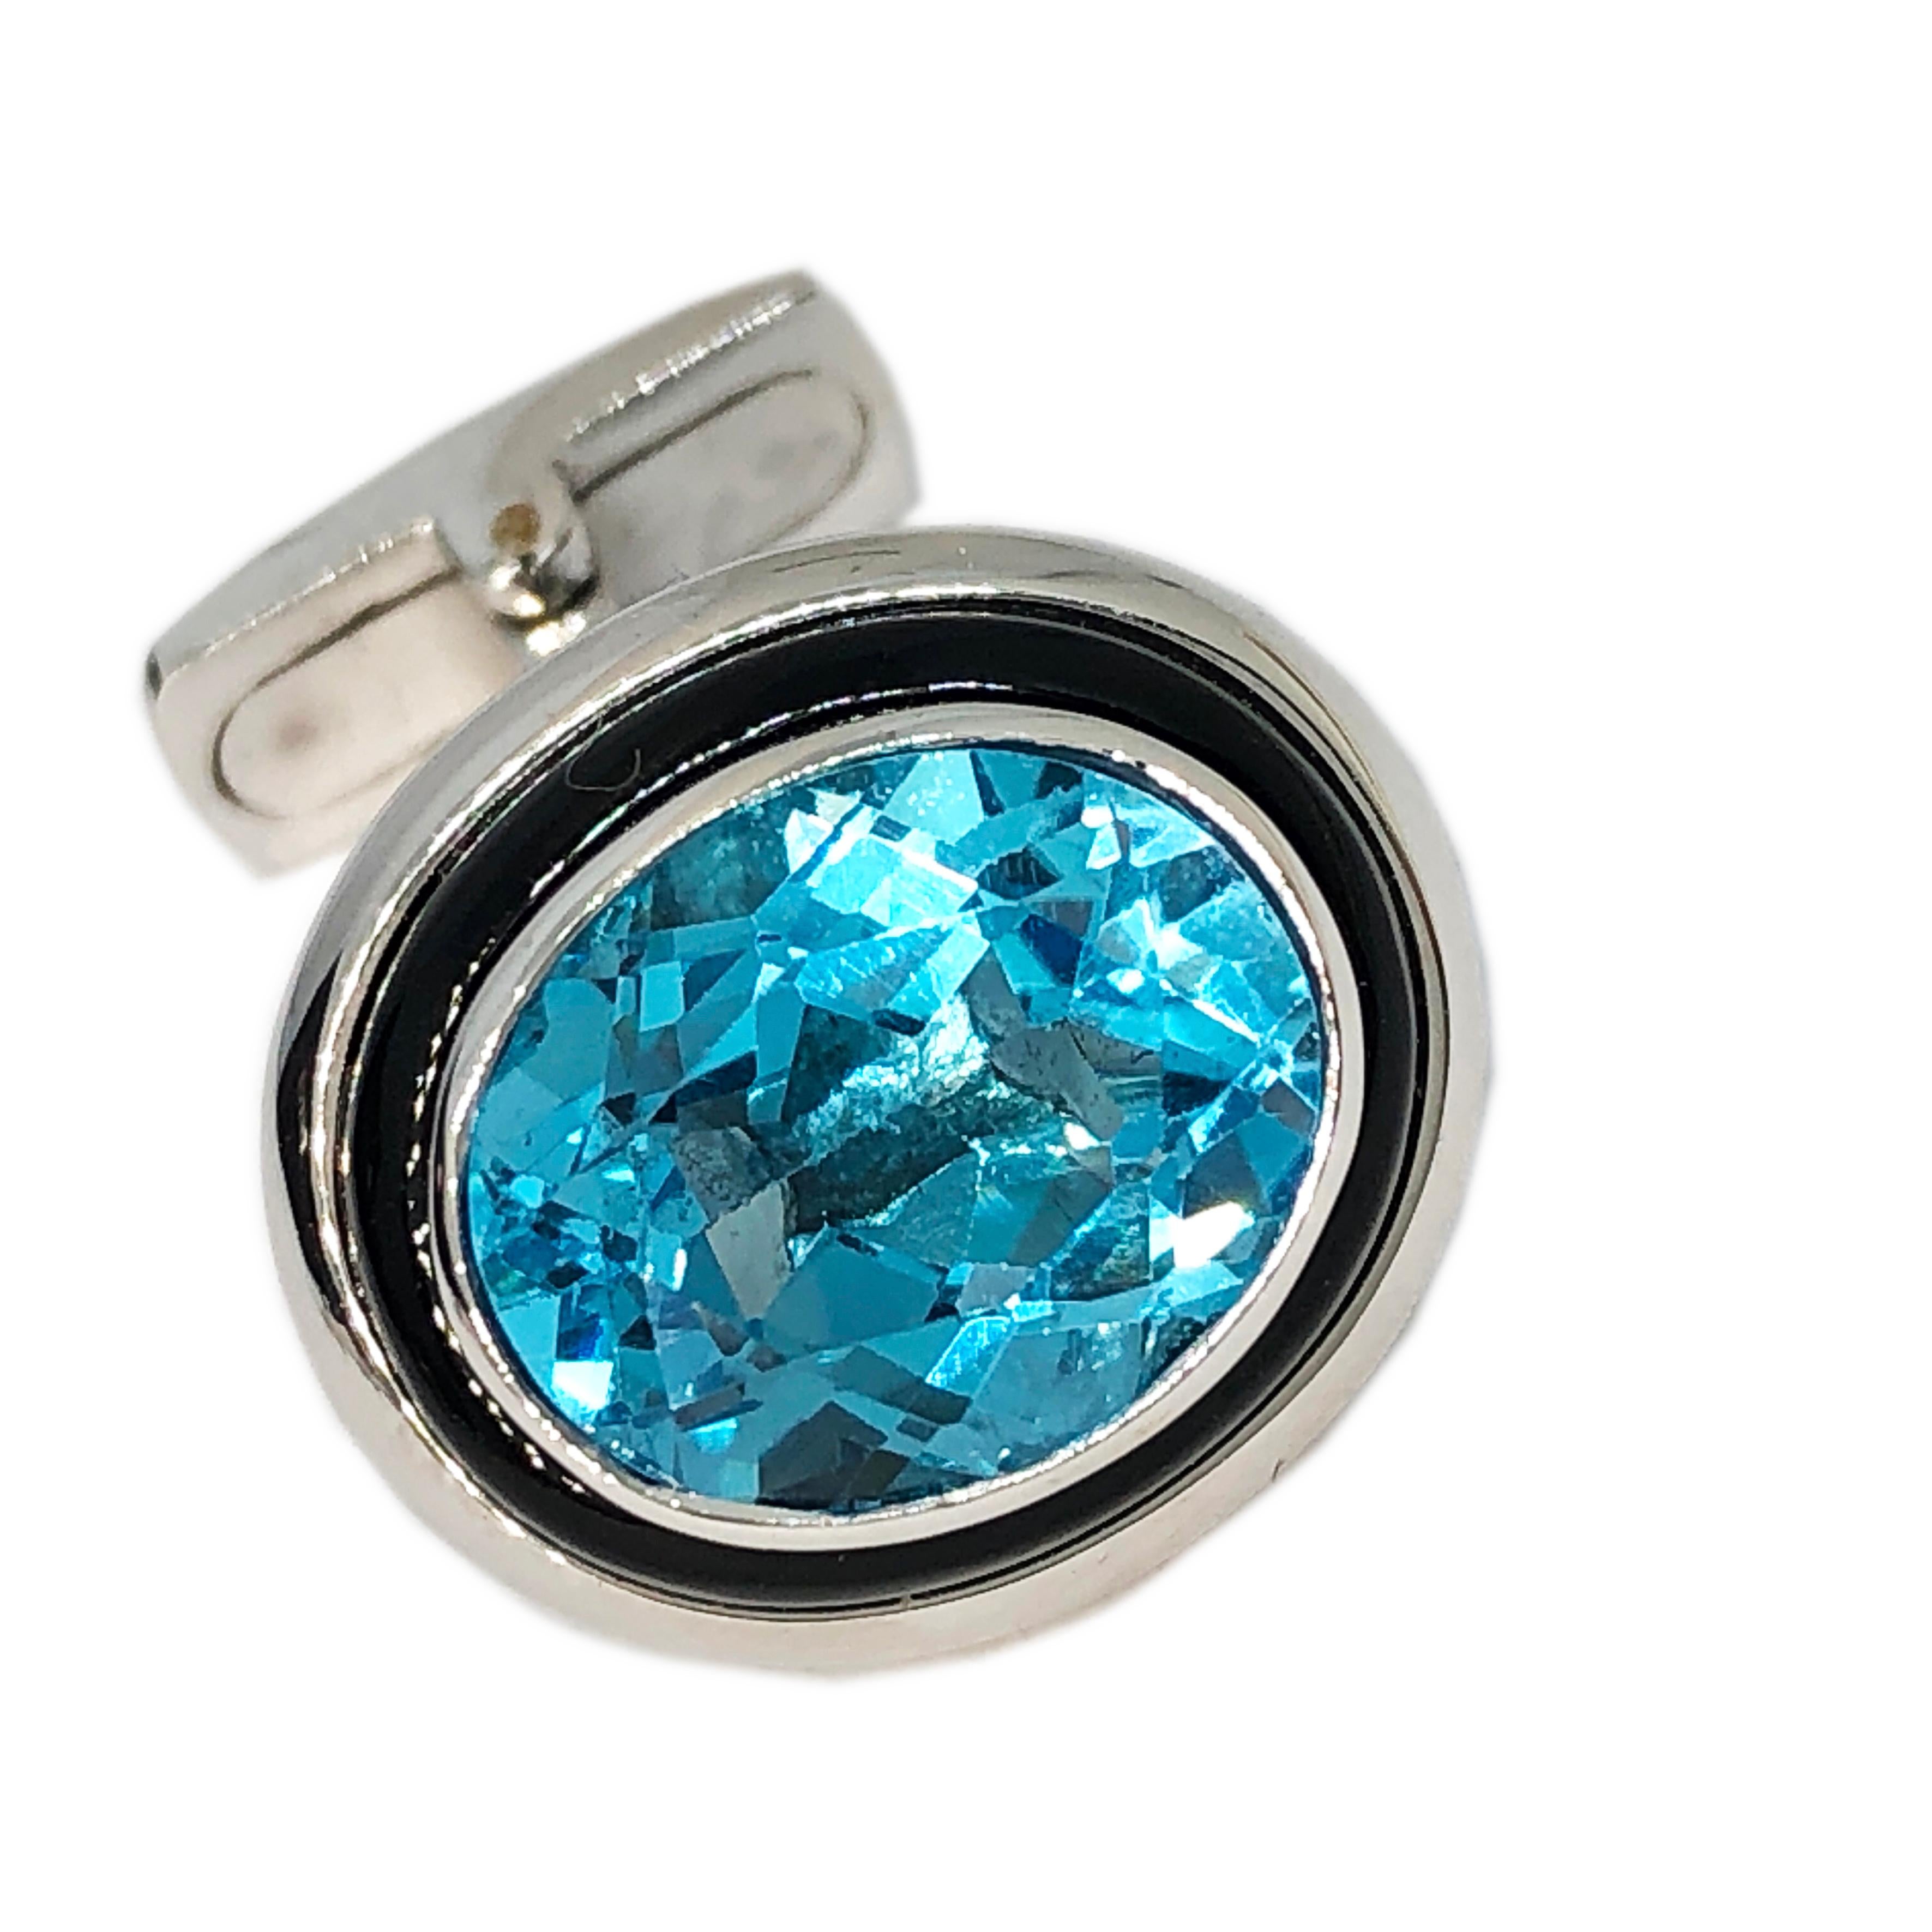 Fabulous, One-of-a-kind 8.97 Carat Oval Blue Topaz Hand Inlaid Onyx 13.30g 18k White Gold Setting Cufflinks, t-bar back.
A fitted smart Black box and pouch are included.

We are glad to offer Complimentary Express Shipping(24 hours) to the Us and